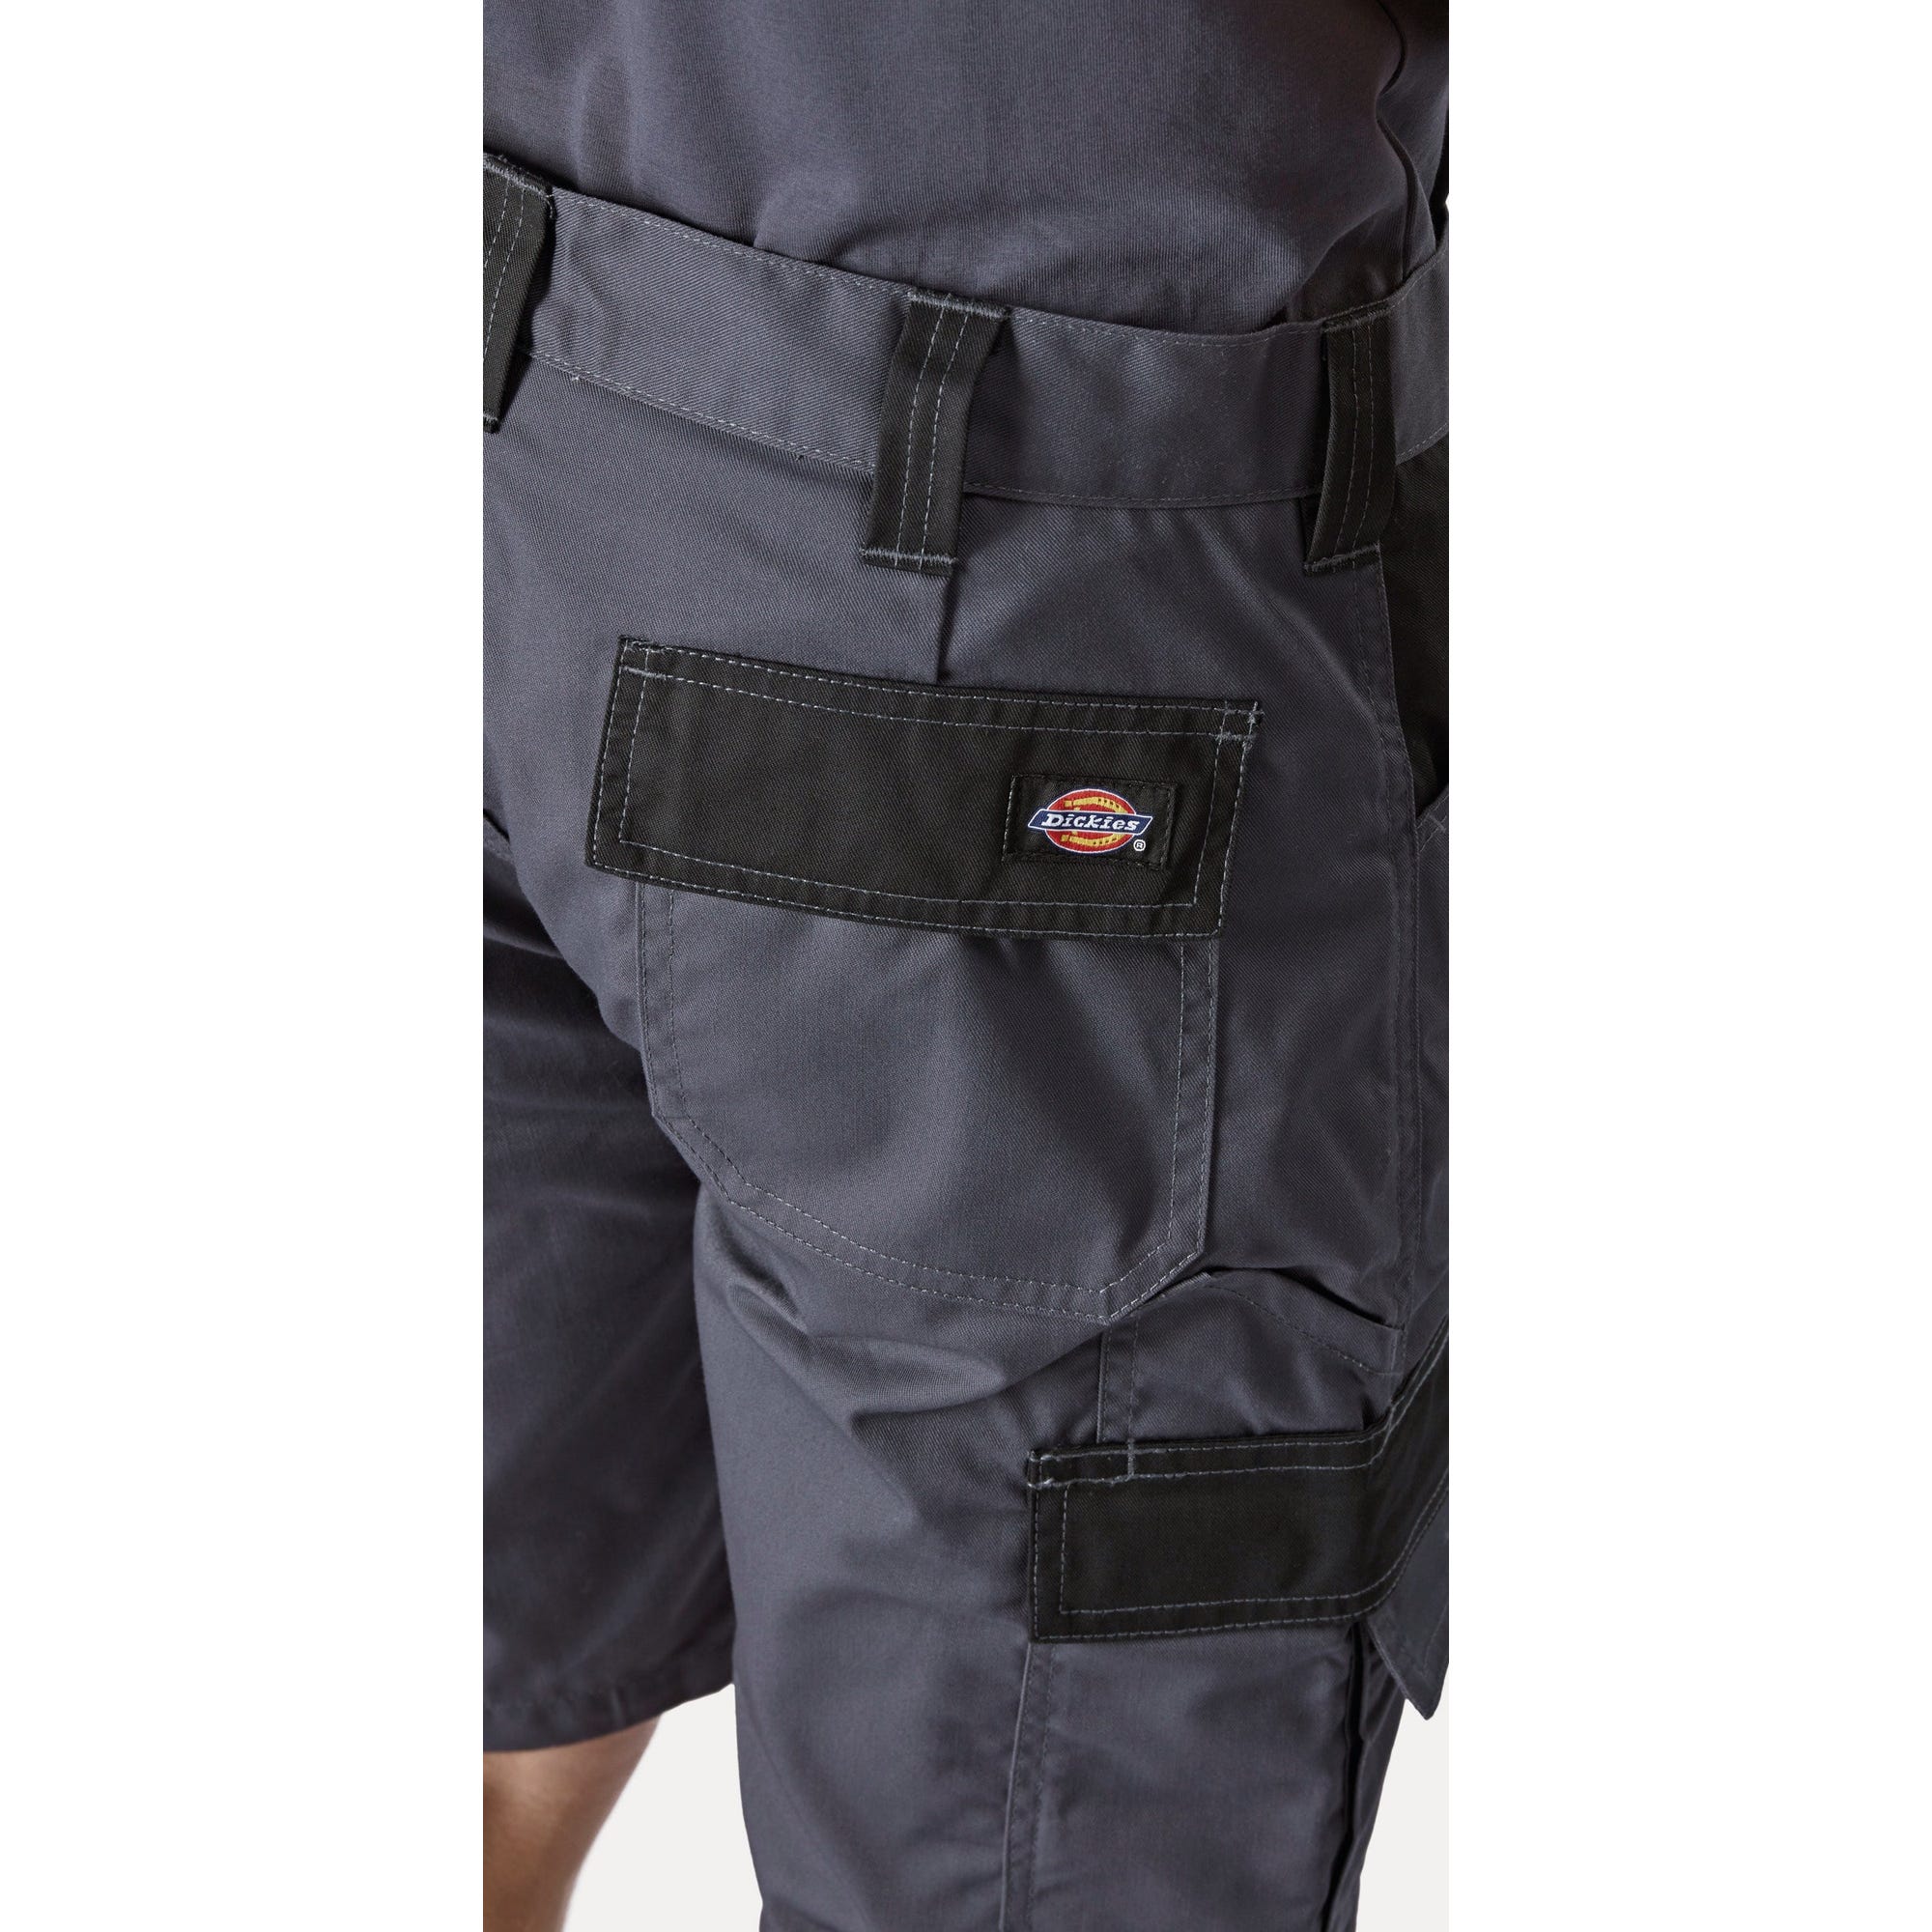 Short Everyday Noir - Dickies - Taille 50 8